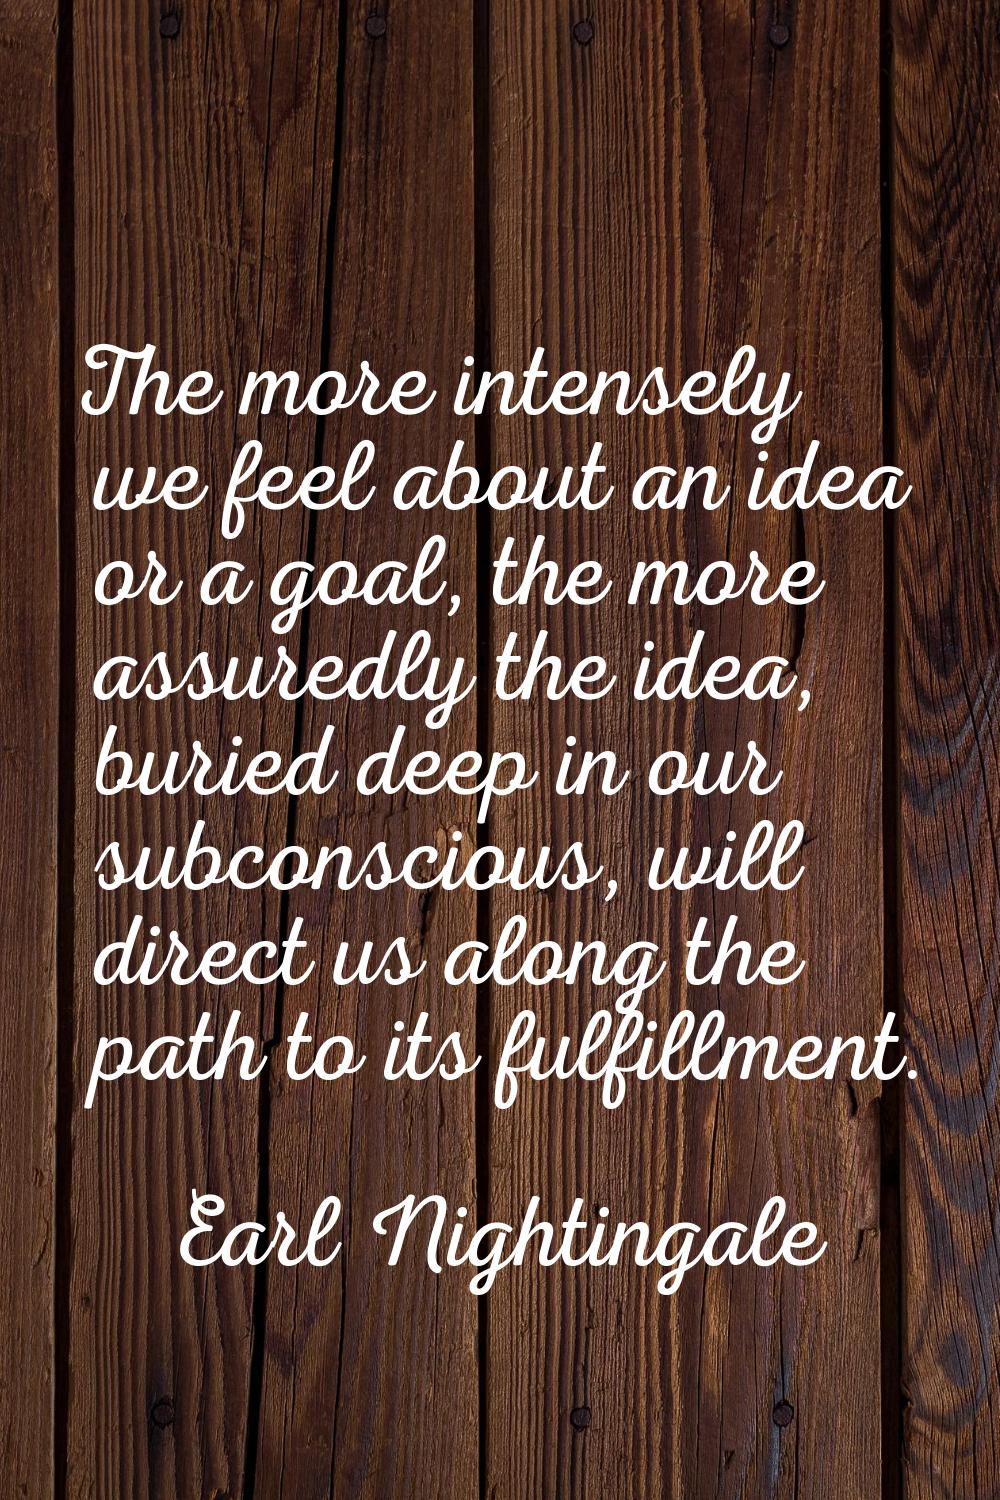 The more intensely we feel about an idea or a goal, the more assuredly the idea, buried deep in our